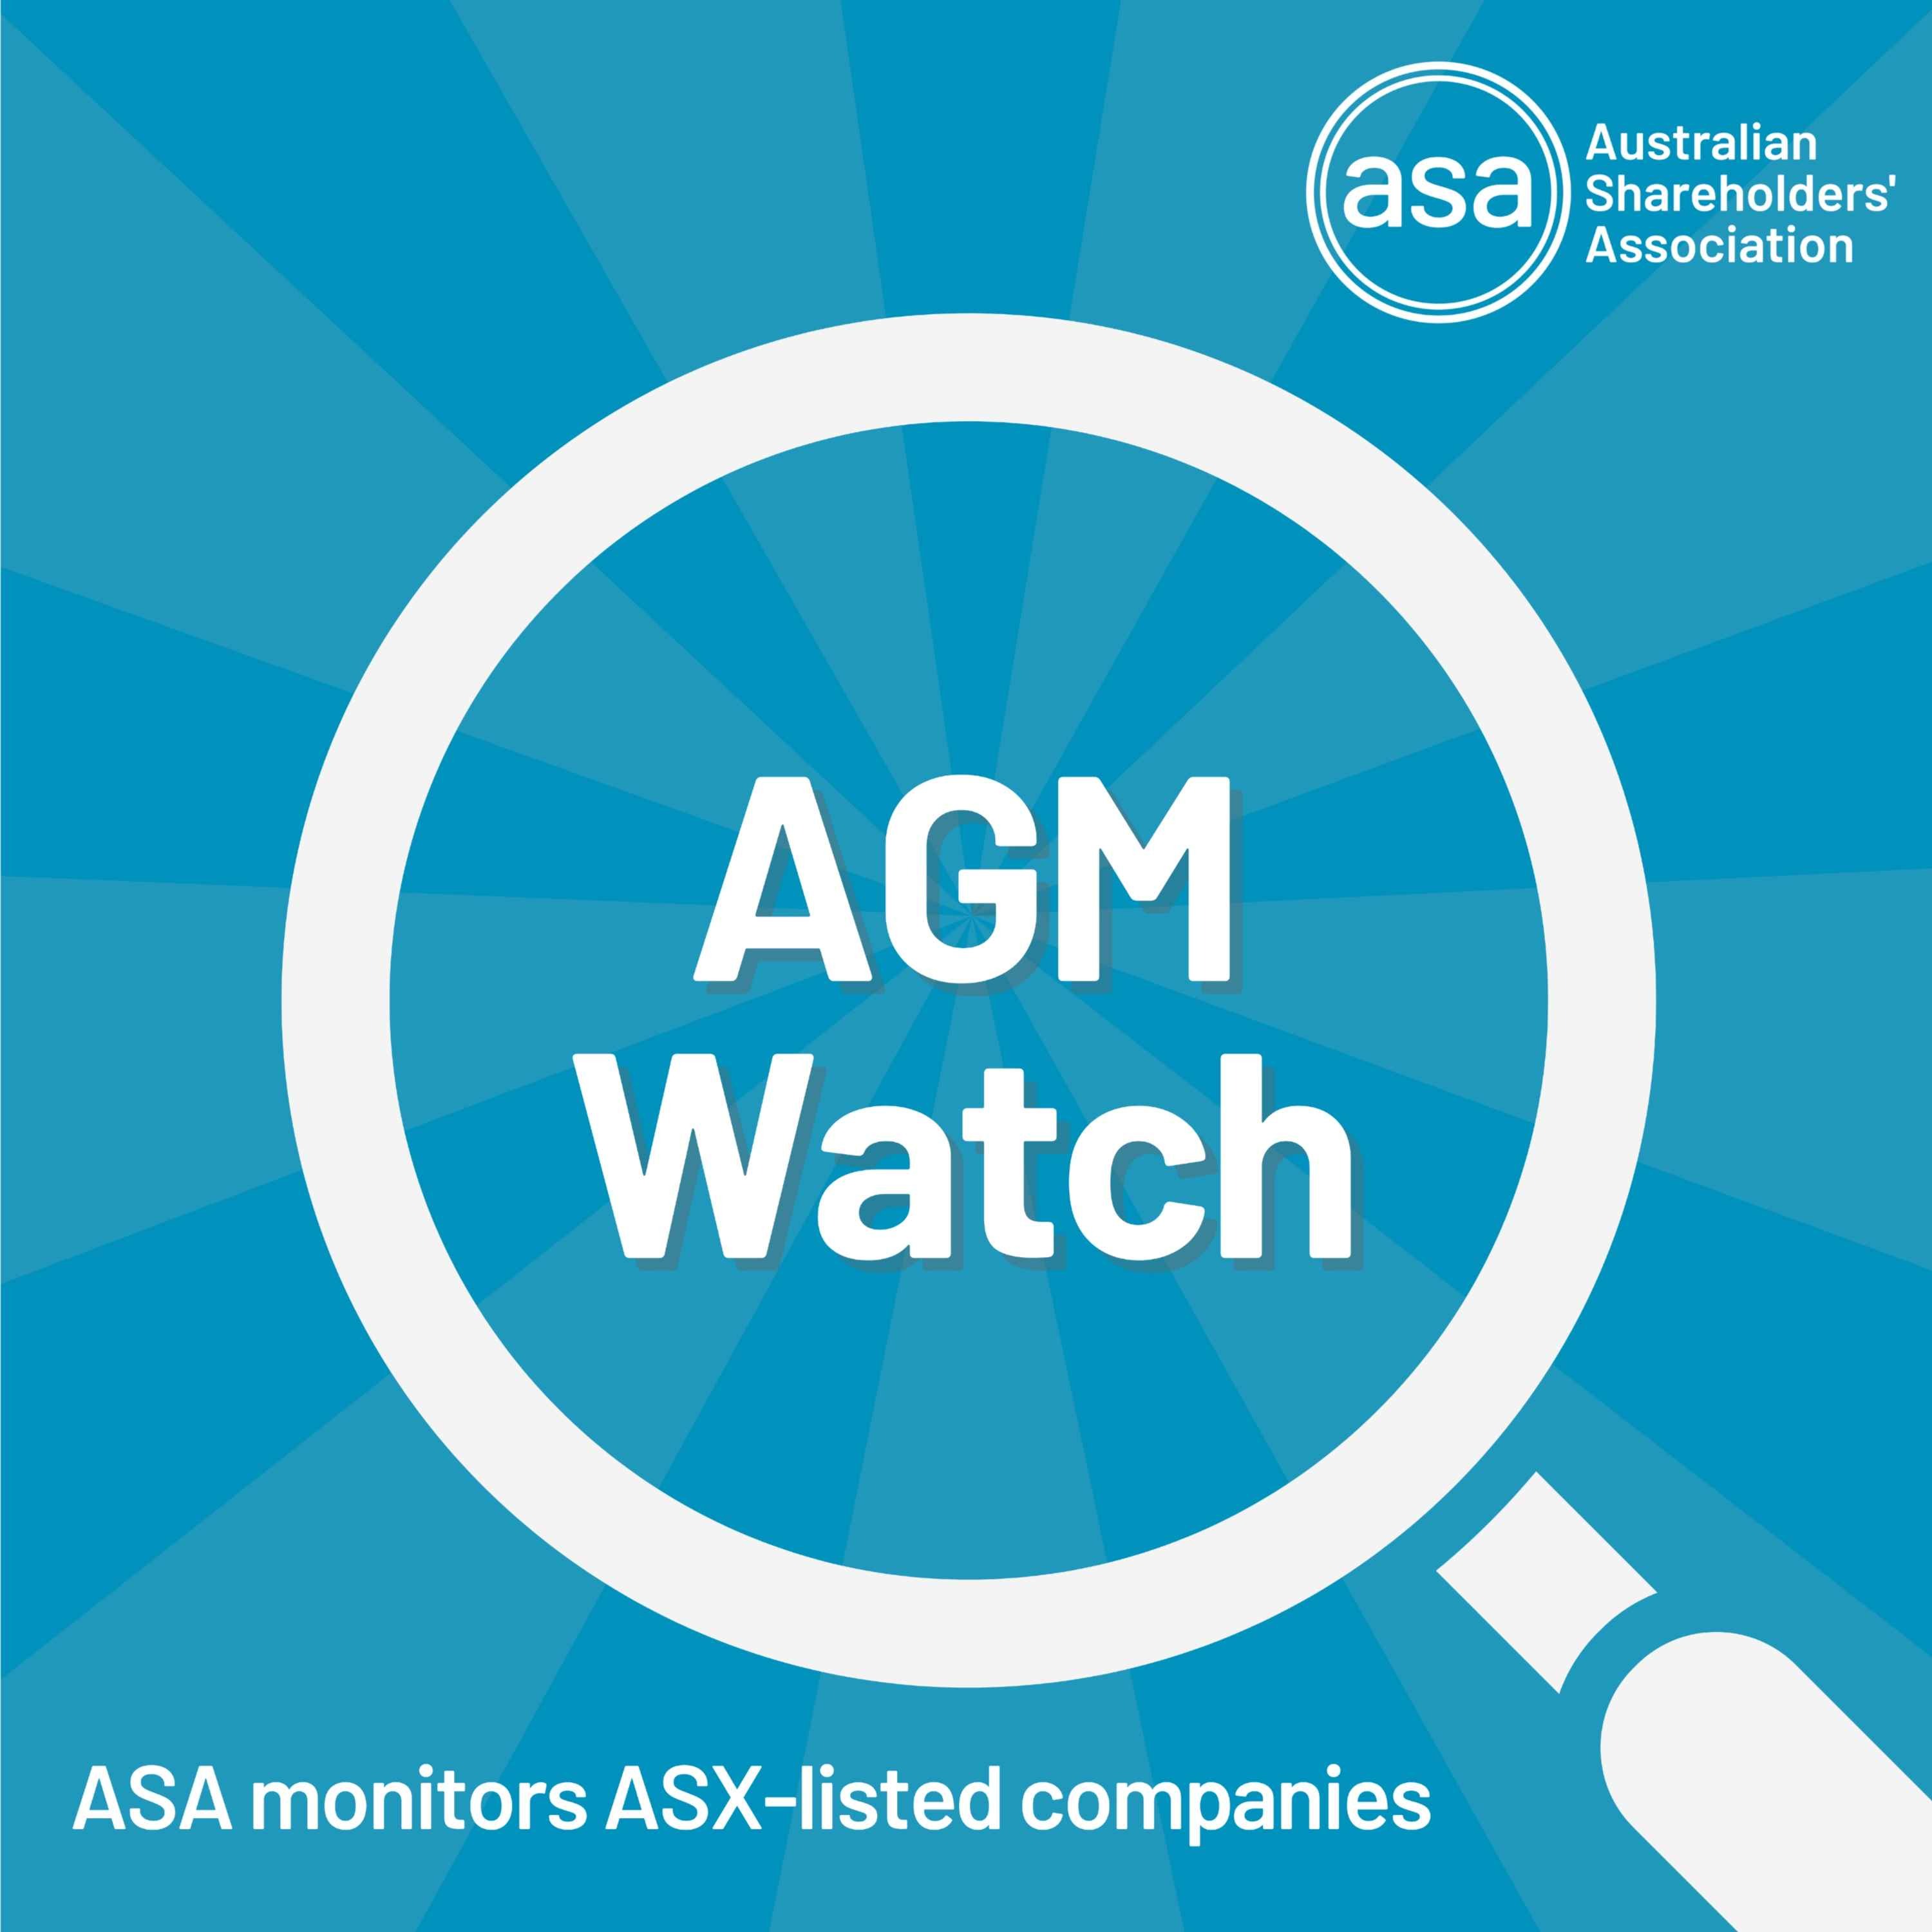 AGM Watch - Tabcorp Holdings